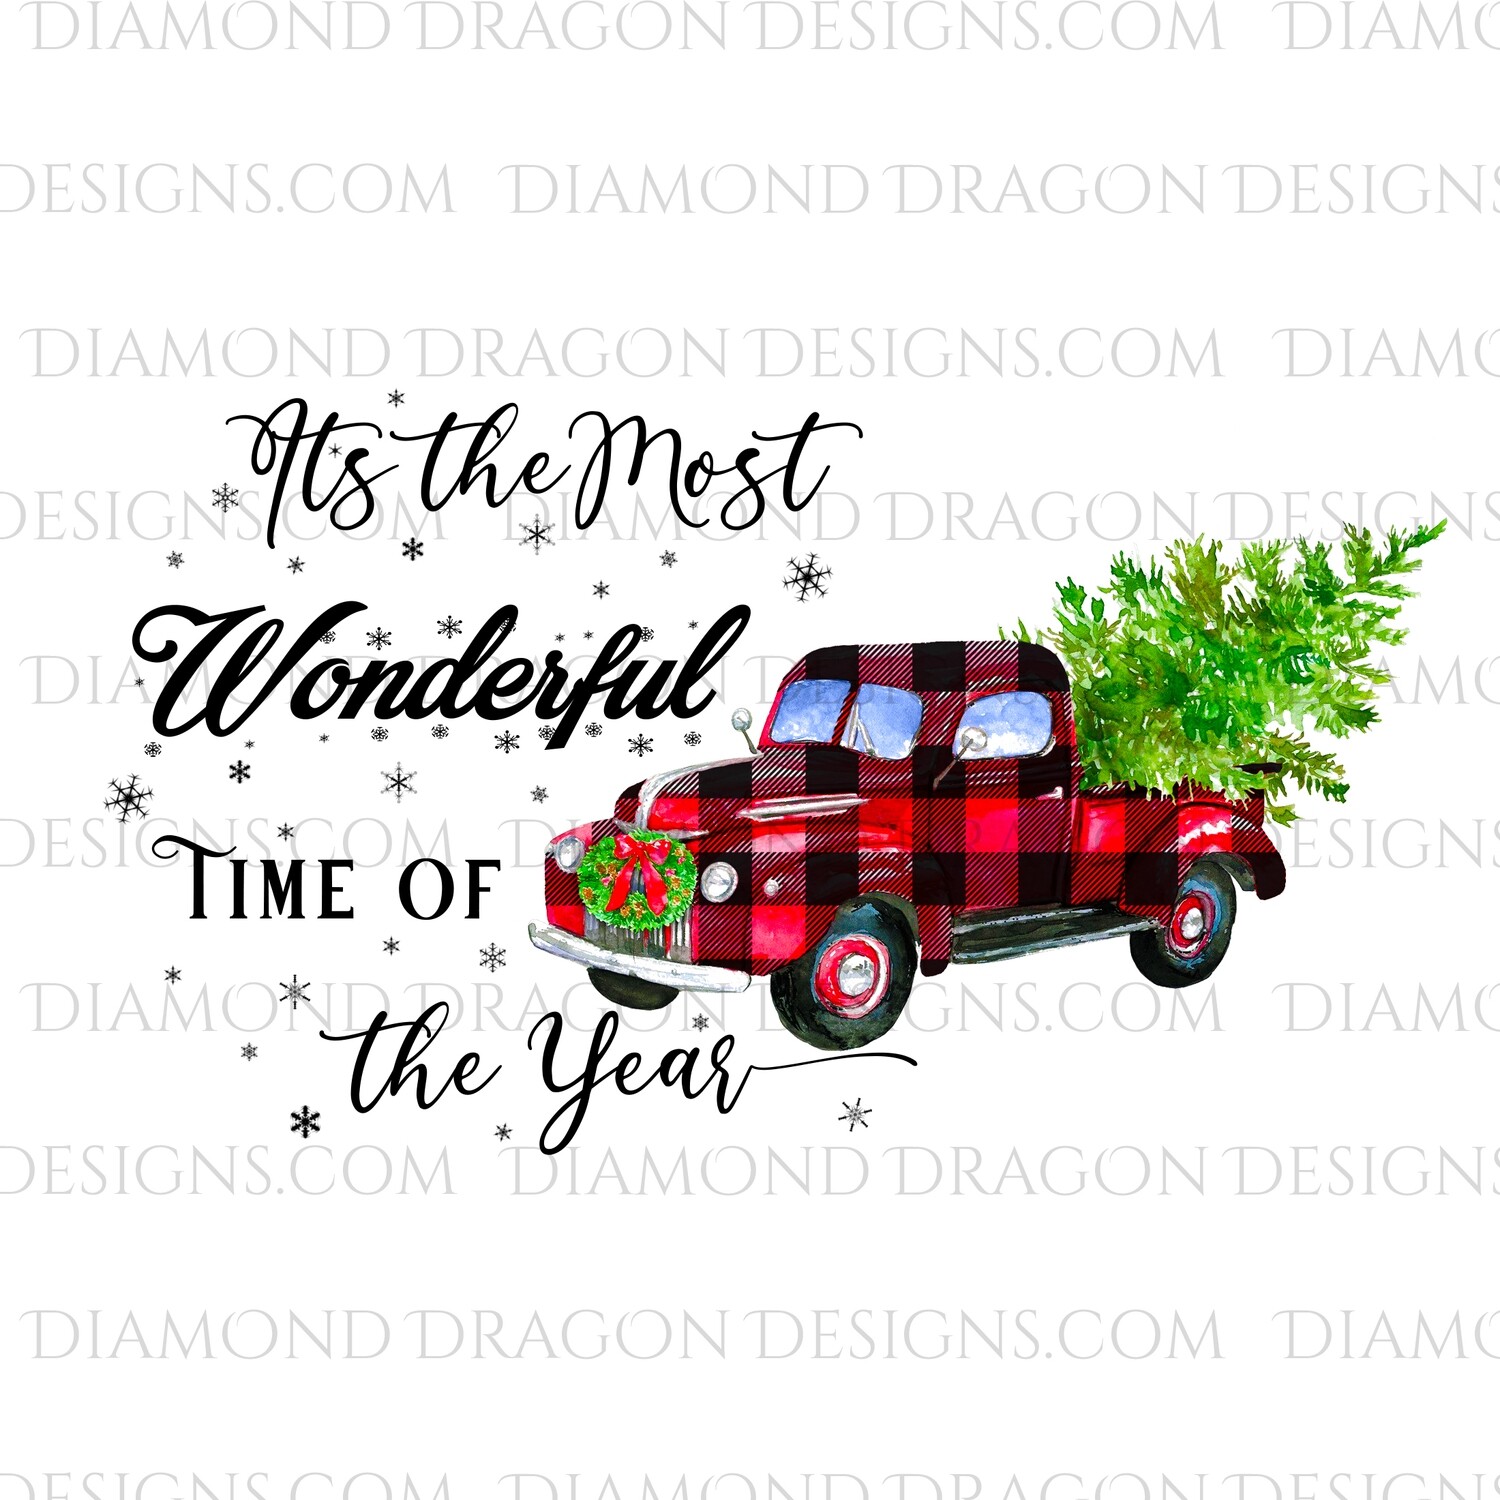 Christmas - Red Plaid Truck, Christmas Tree, It’s the most wonderful time, Red Vintage Truck, Waterslide